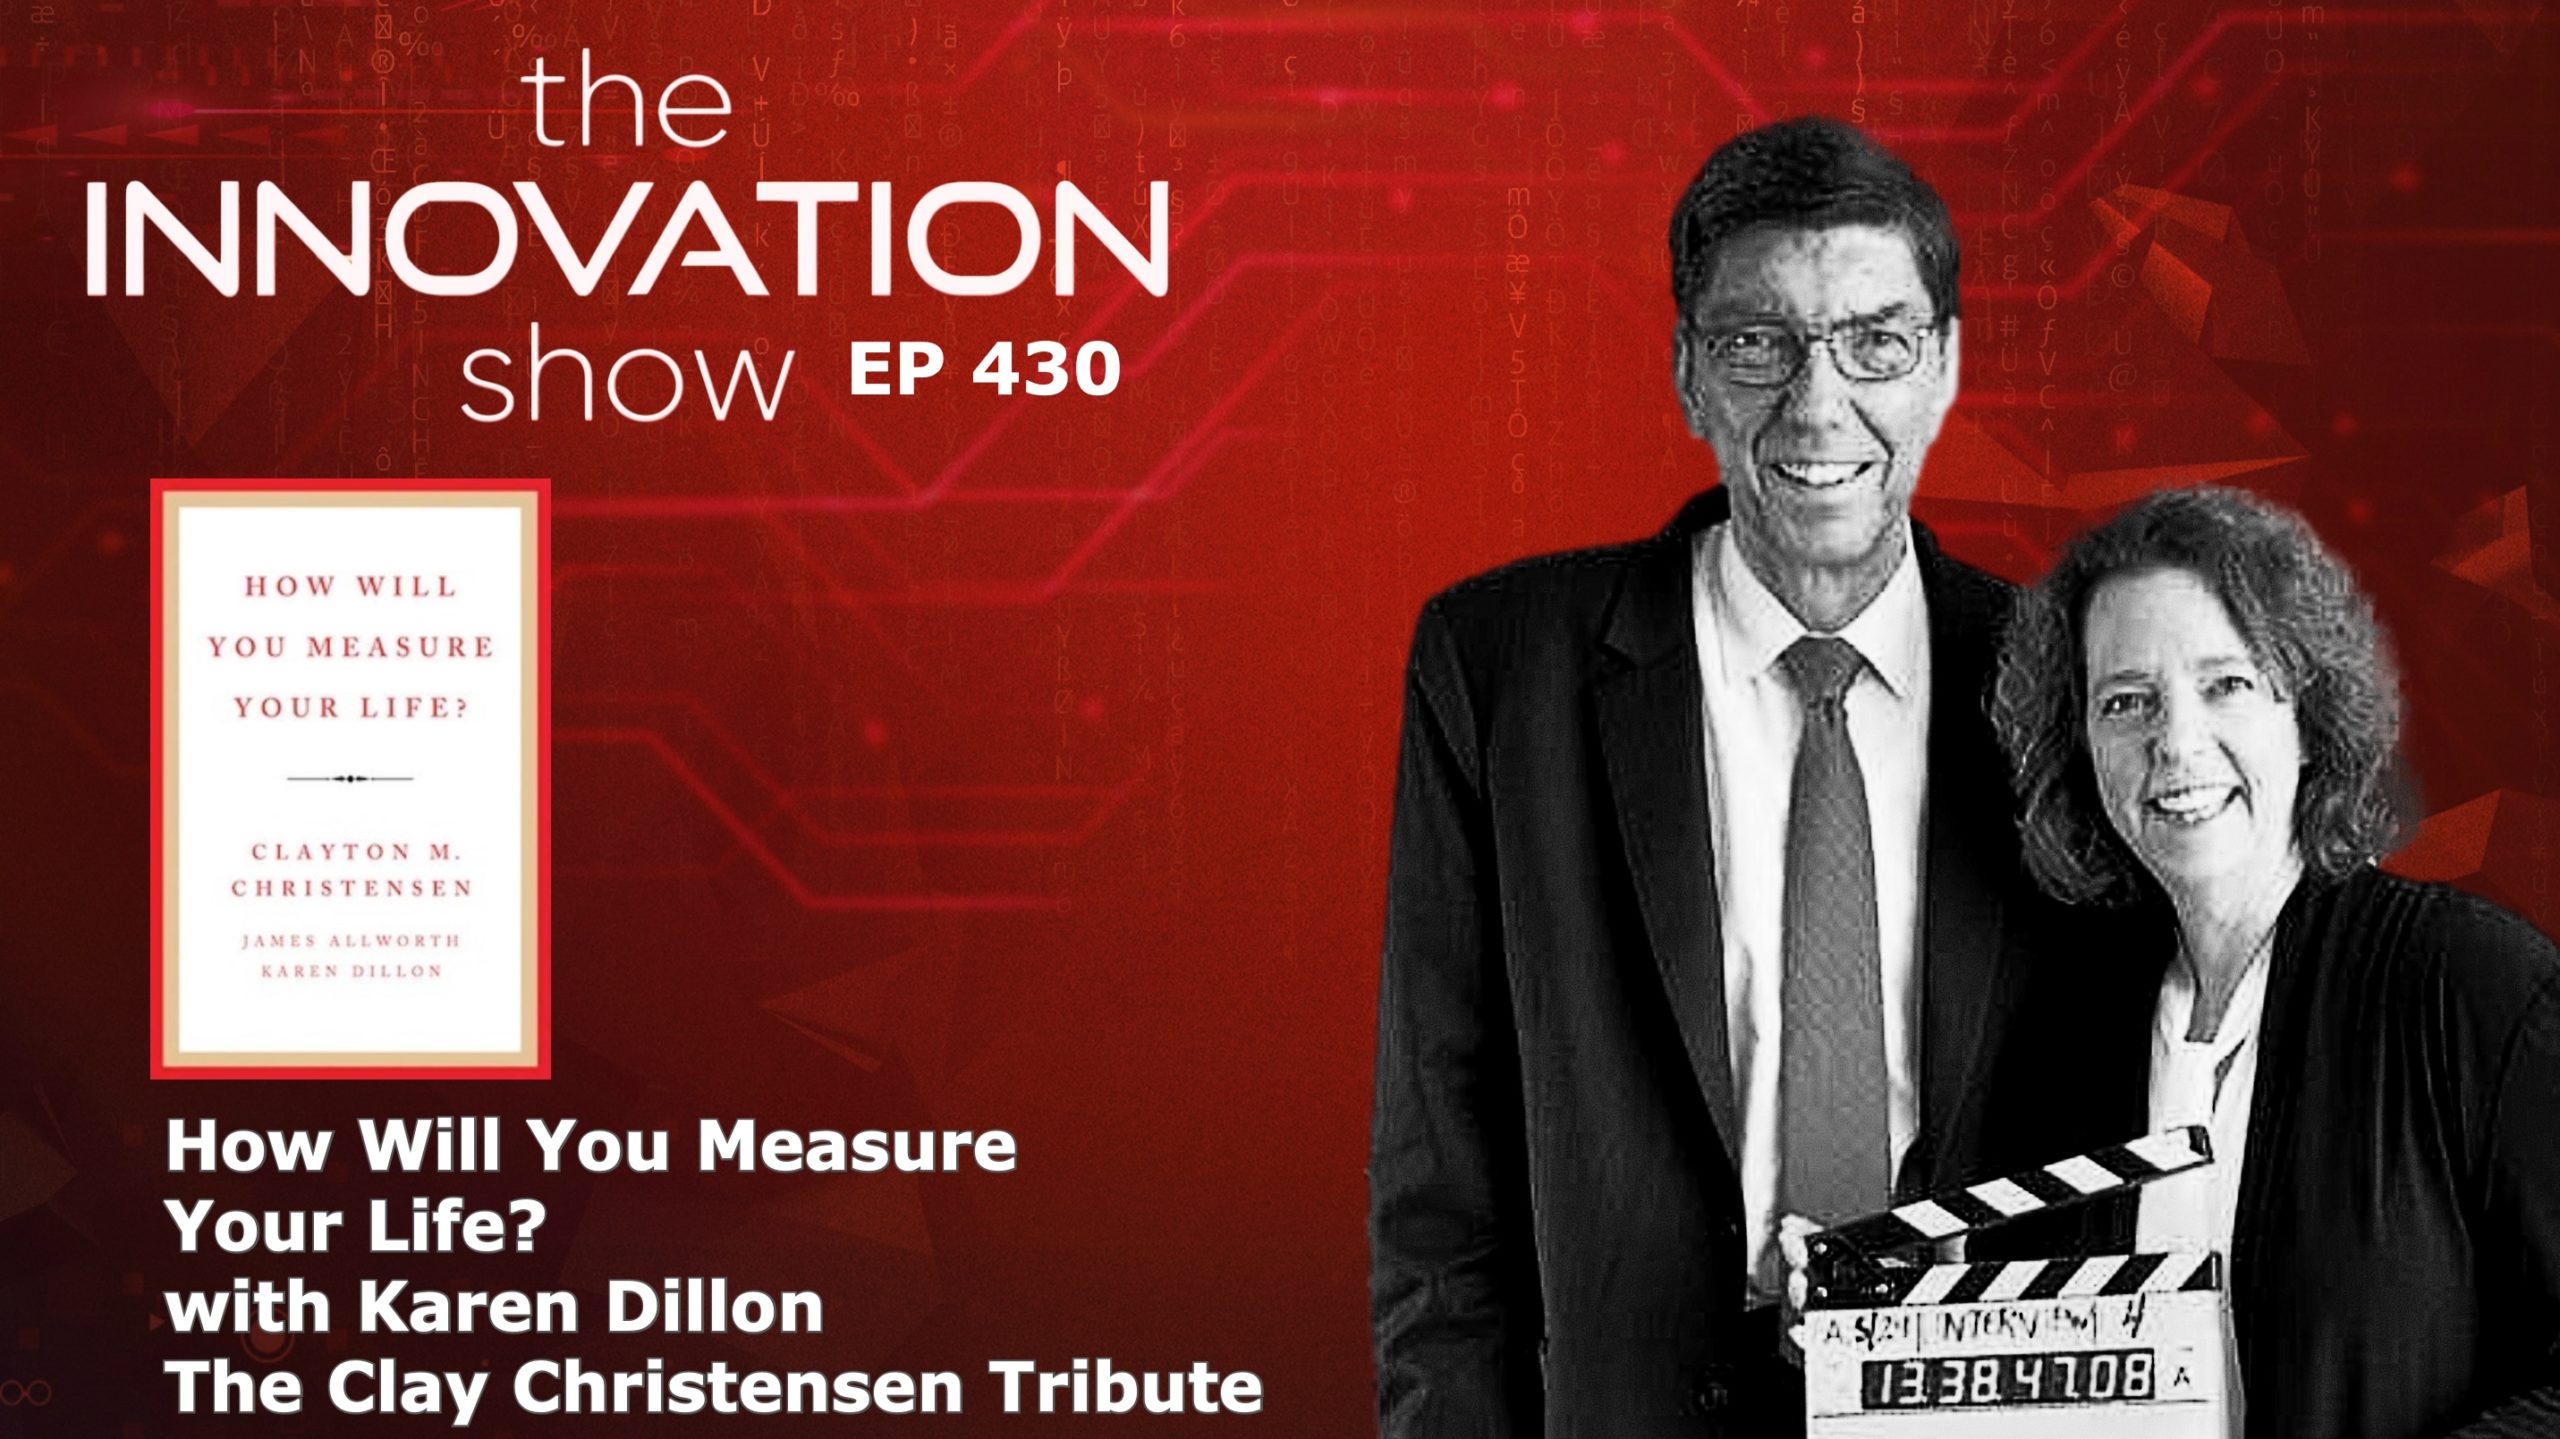 How Will You Measure Your Life? with Karen Dillon The Clay Christensen Tribute